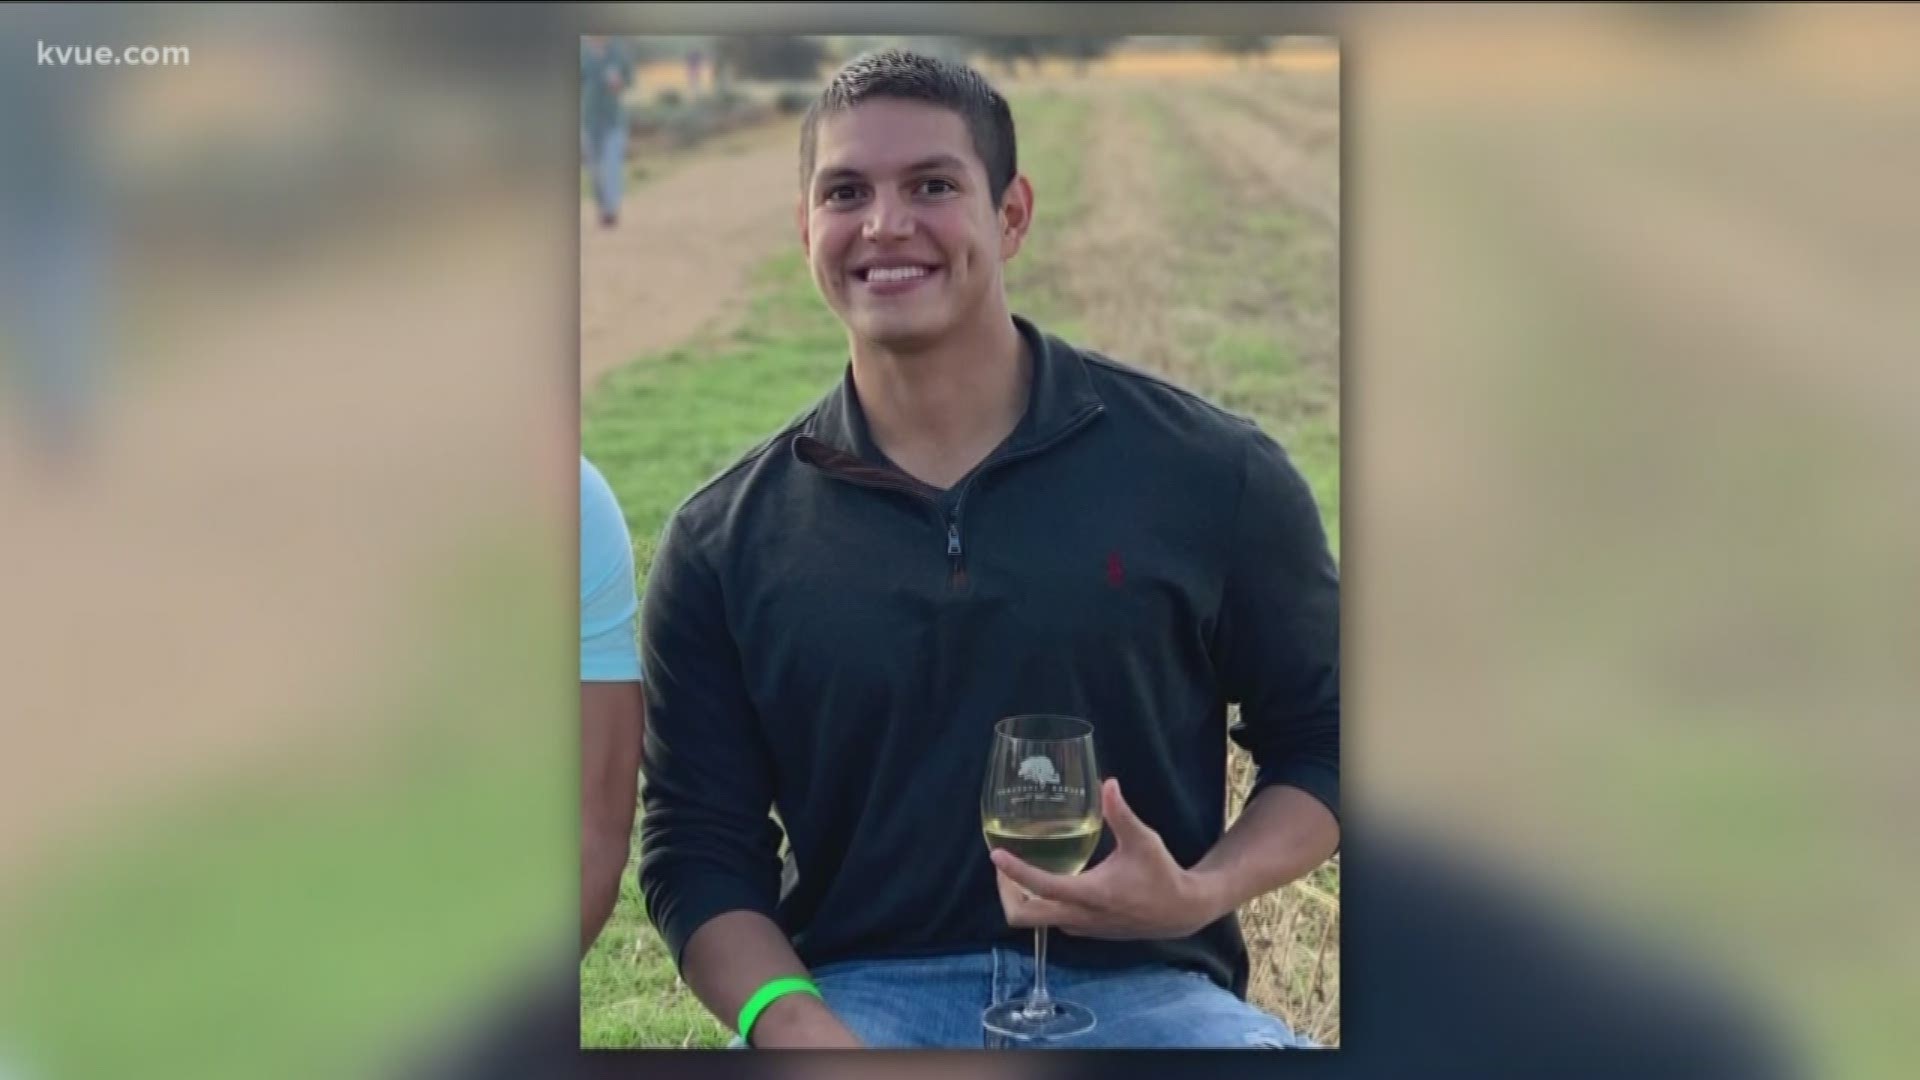 The Austin Police Department is seeking the public's help in locating a man who was last seen Monday.

According to police, Martin Gutierrez, 25, was last seen at Monday 1 a.m. on Rainey Street.
STORY: http://www.kvue.com/news/local/austin-police-seeking-